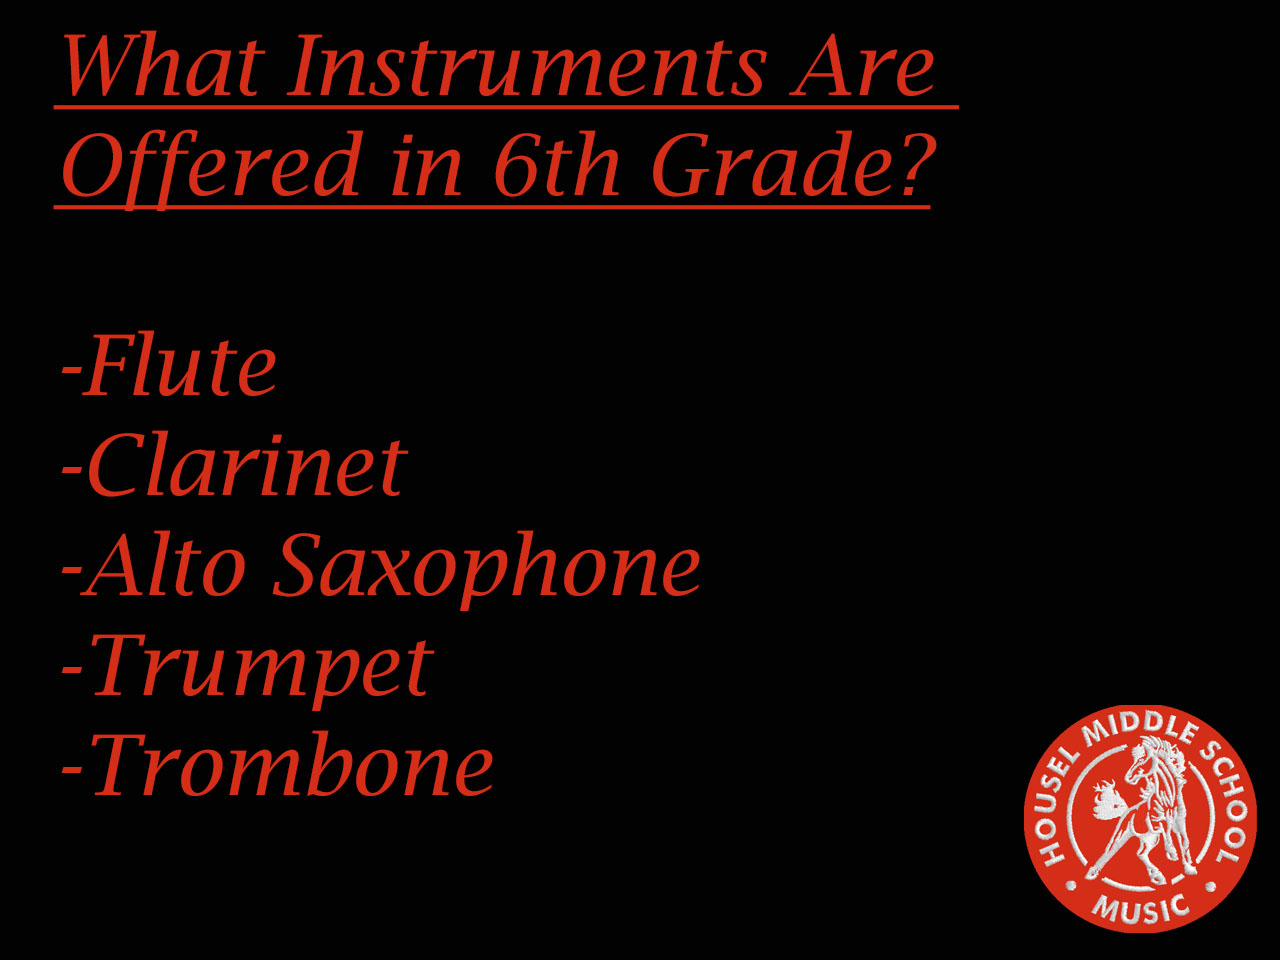 What Instruments are offered in 6th grade?